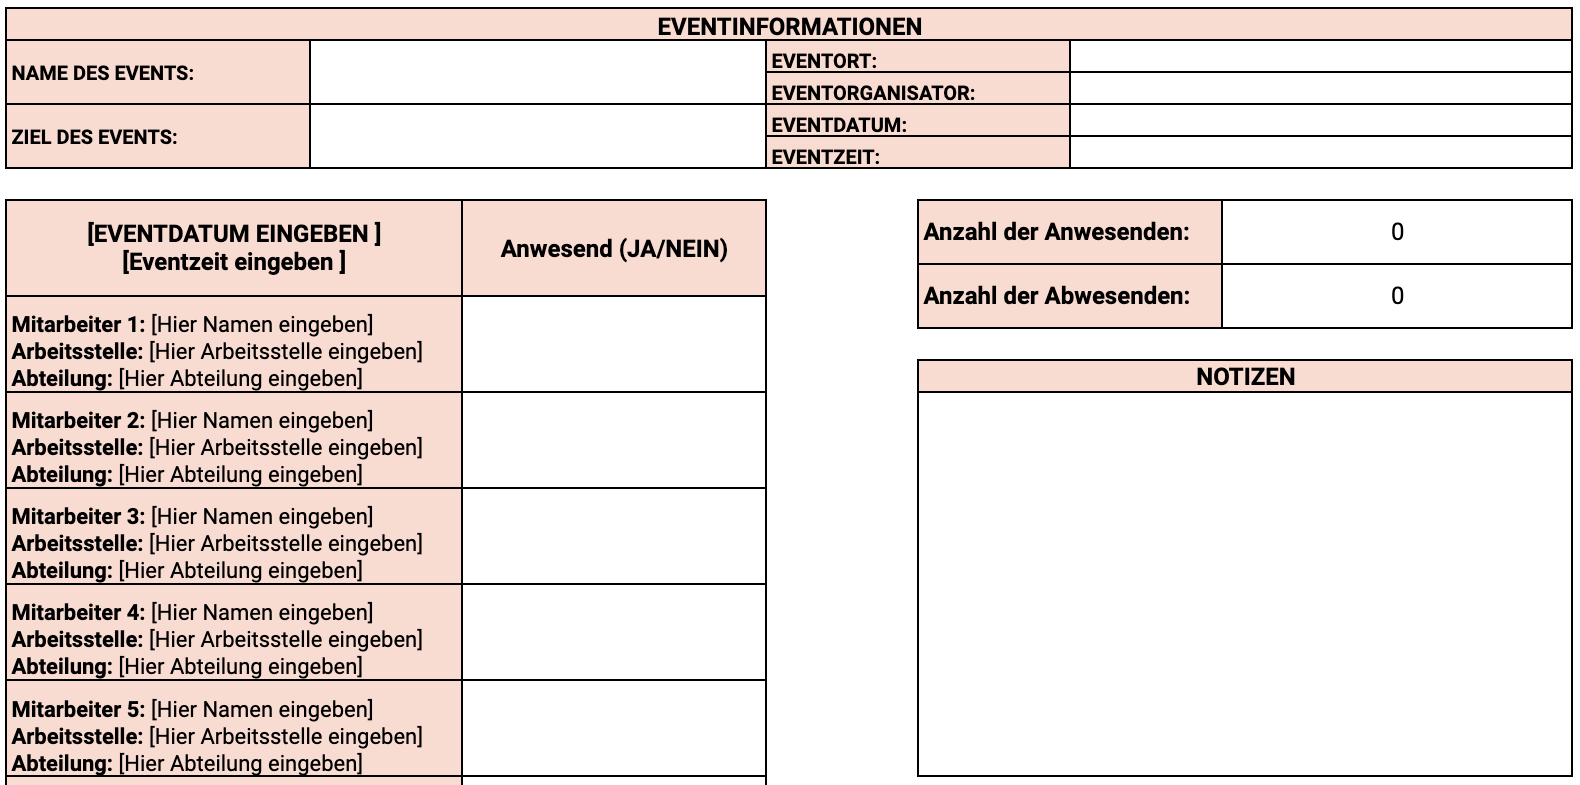 Anwesenheit bei Events